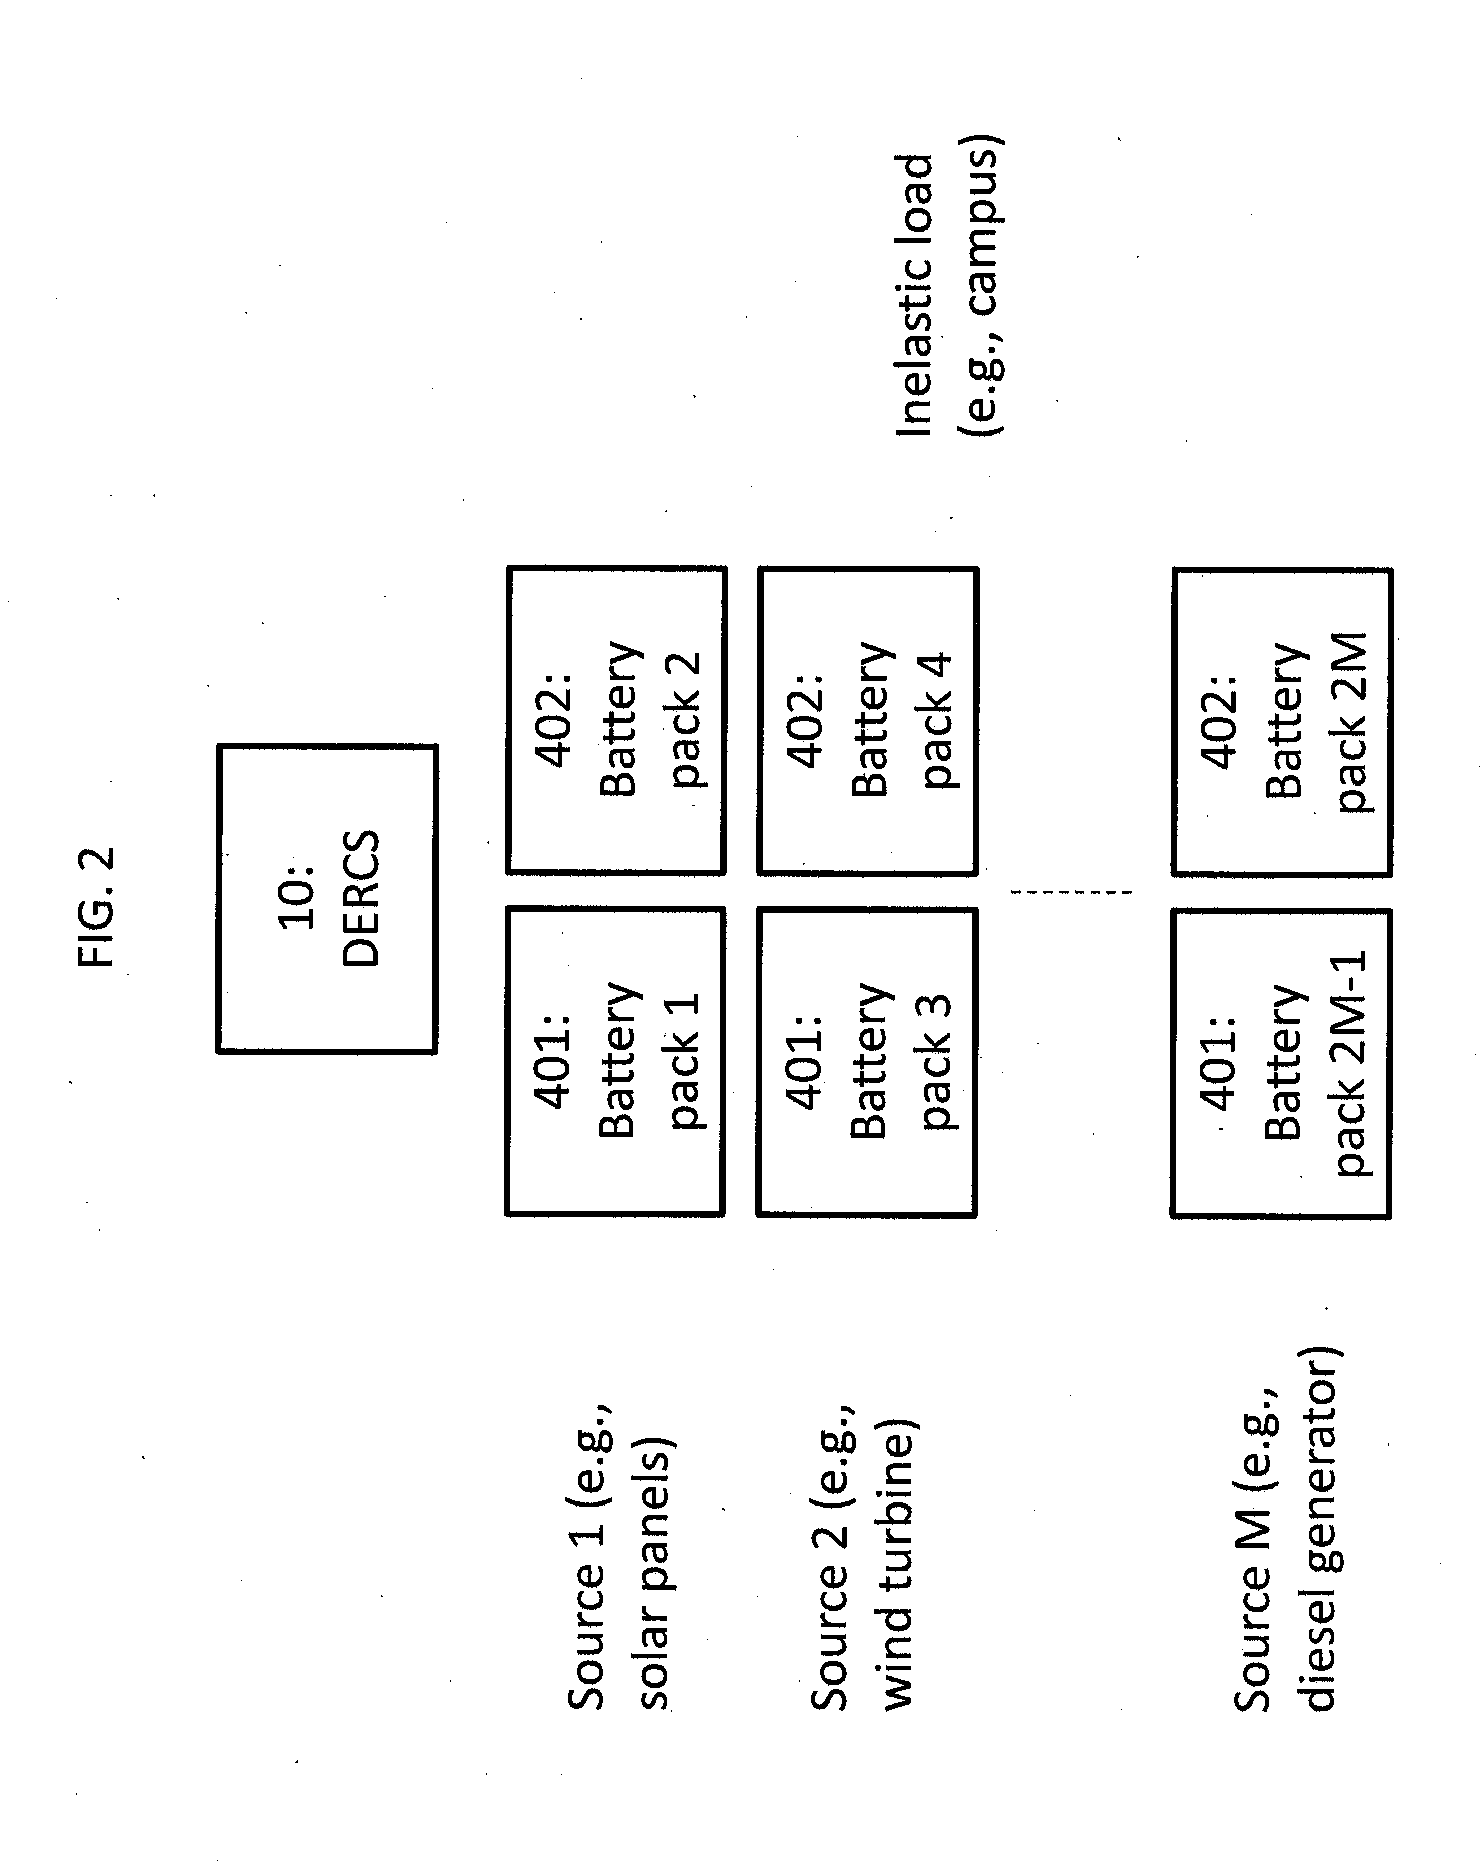 Digital Electrical Routing Control System for Use with Electrical Storage Systems and Conventional and Alternative Energy Sources